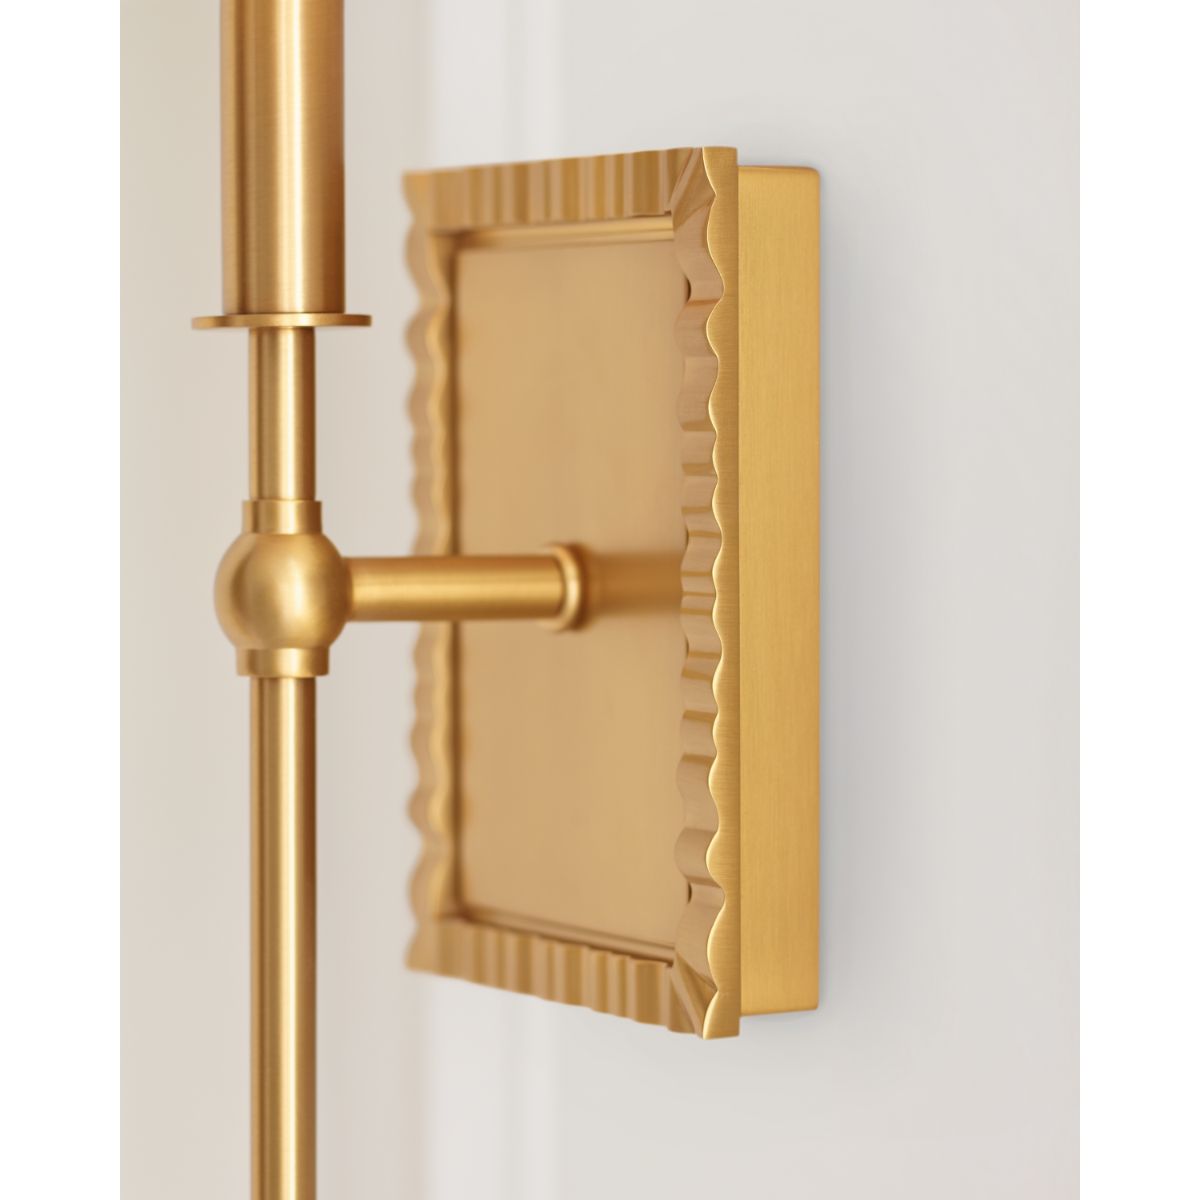 Baxley 21 in. Armed Sconce